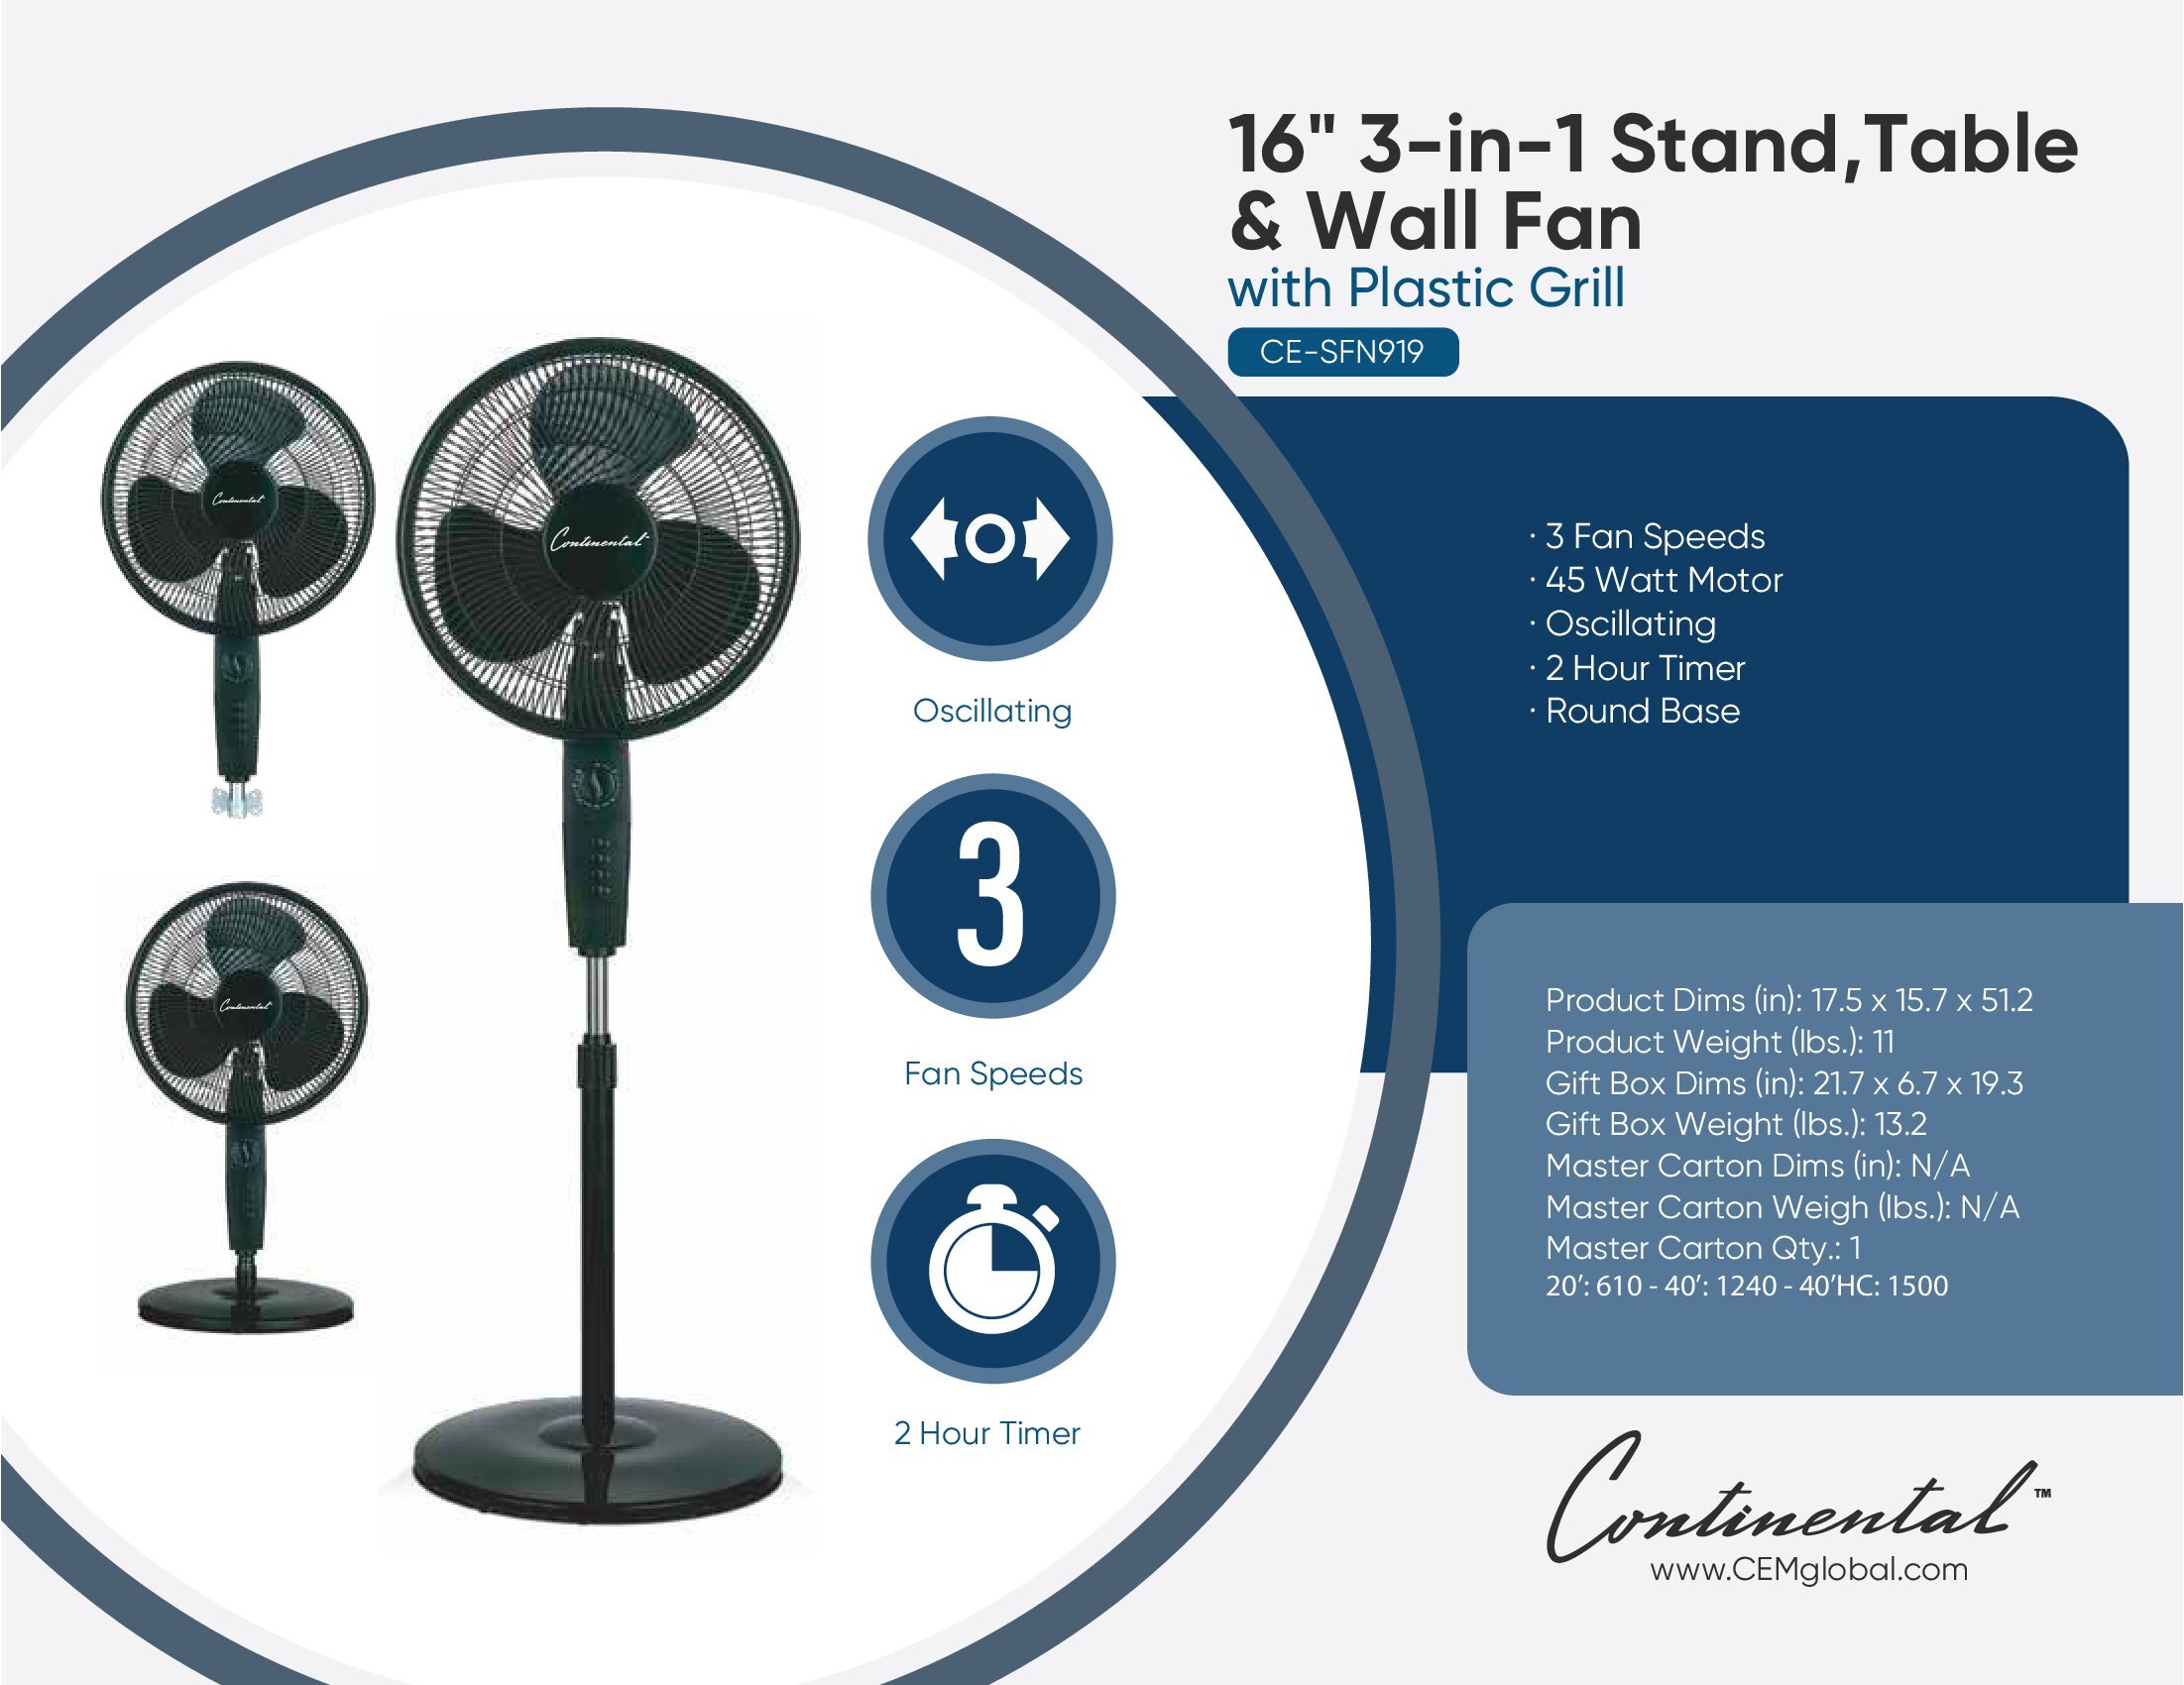 16" 3-in-1 Stand, Table & Wall Fan with Plastic Grill